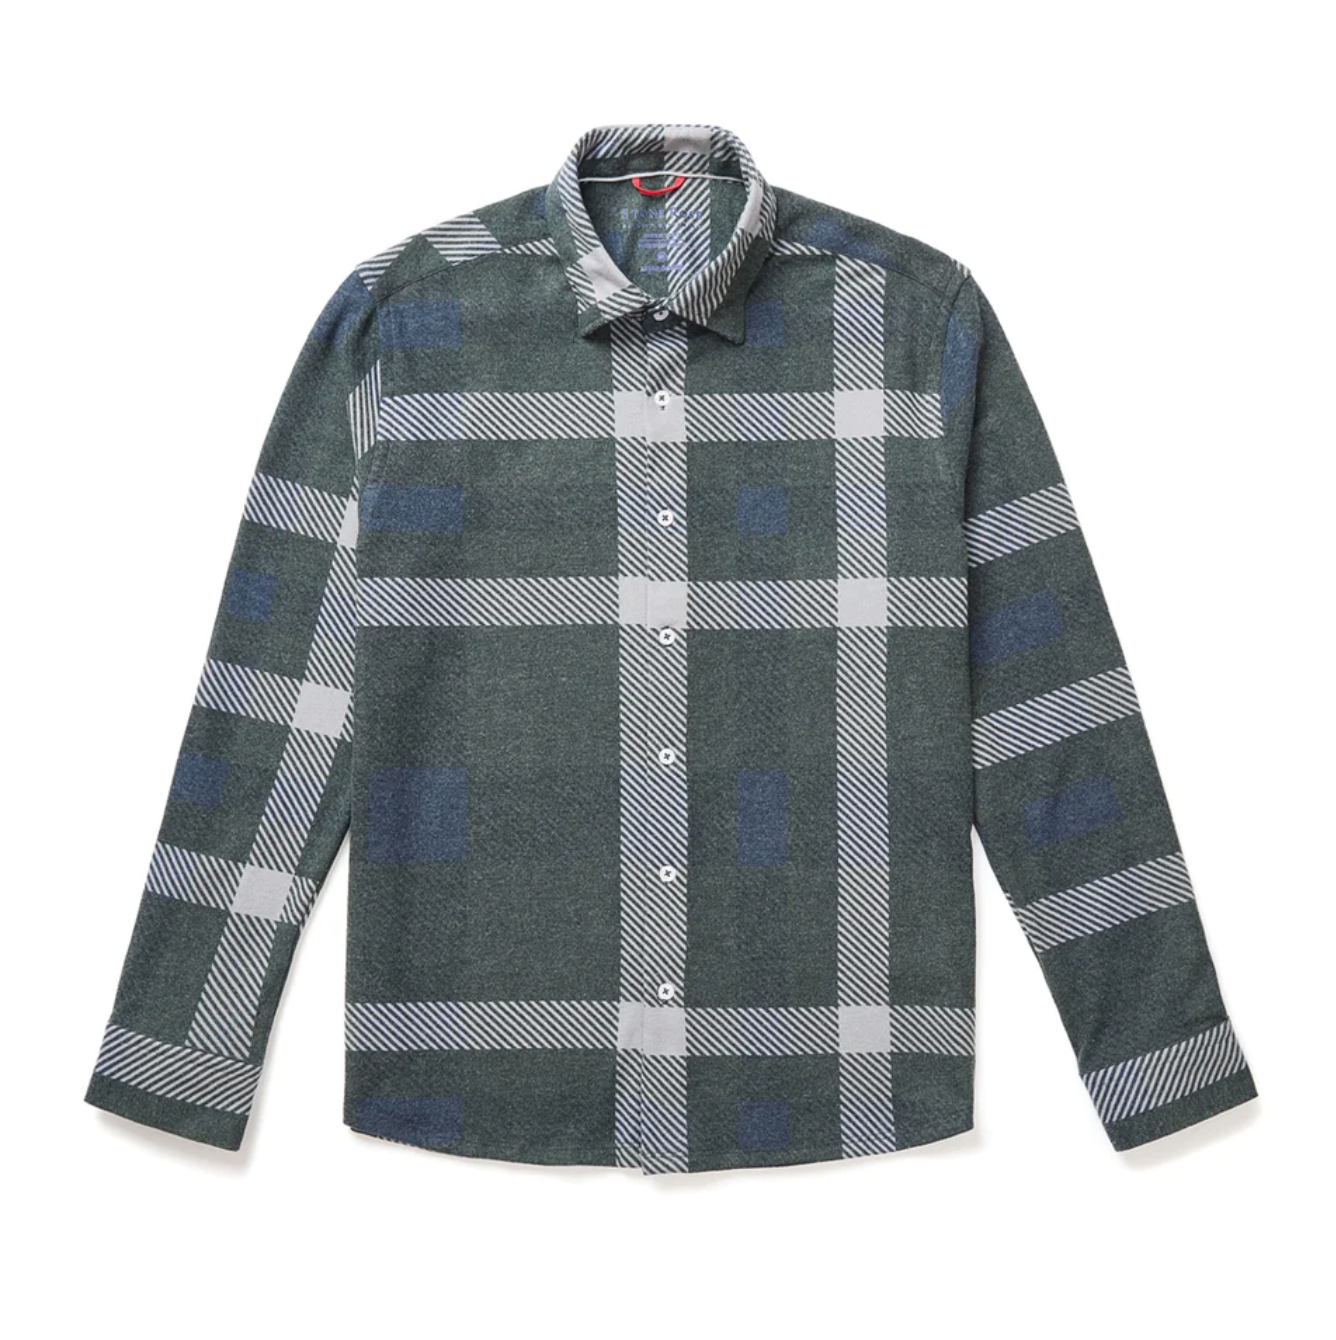 grey shirt with large exaggerated plaid print